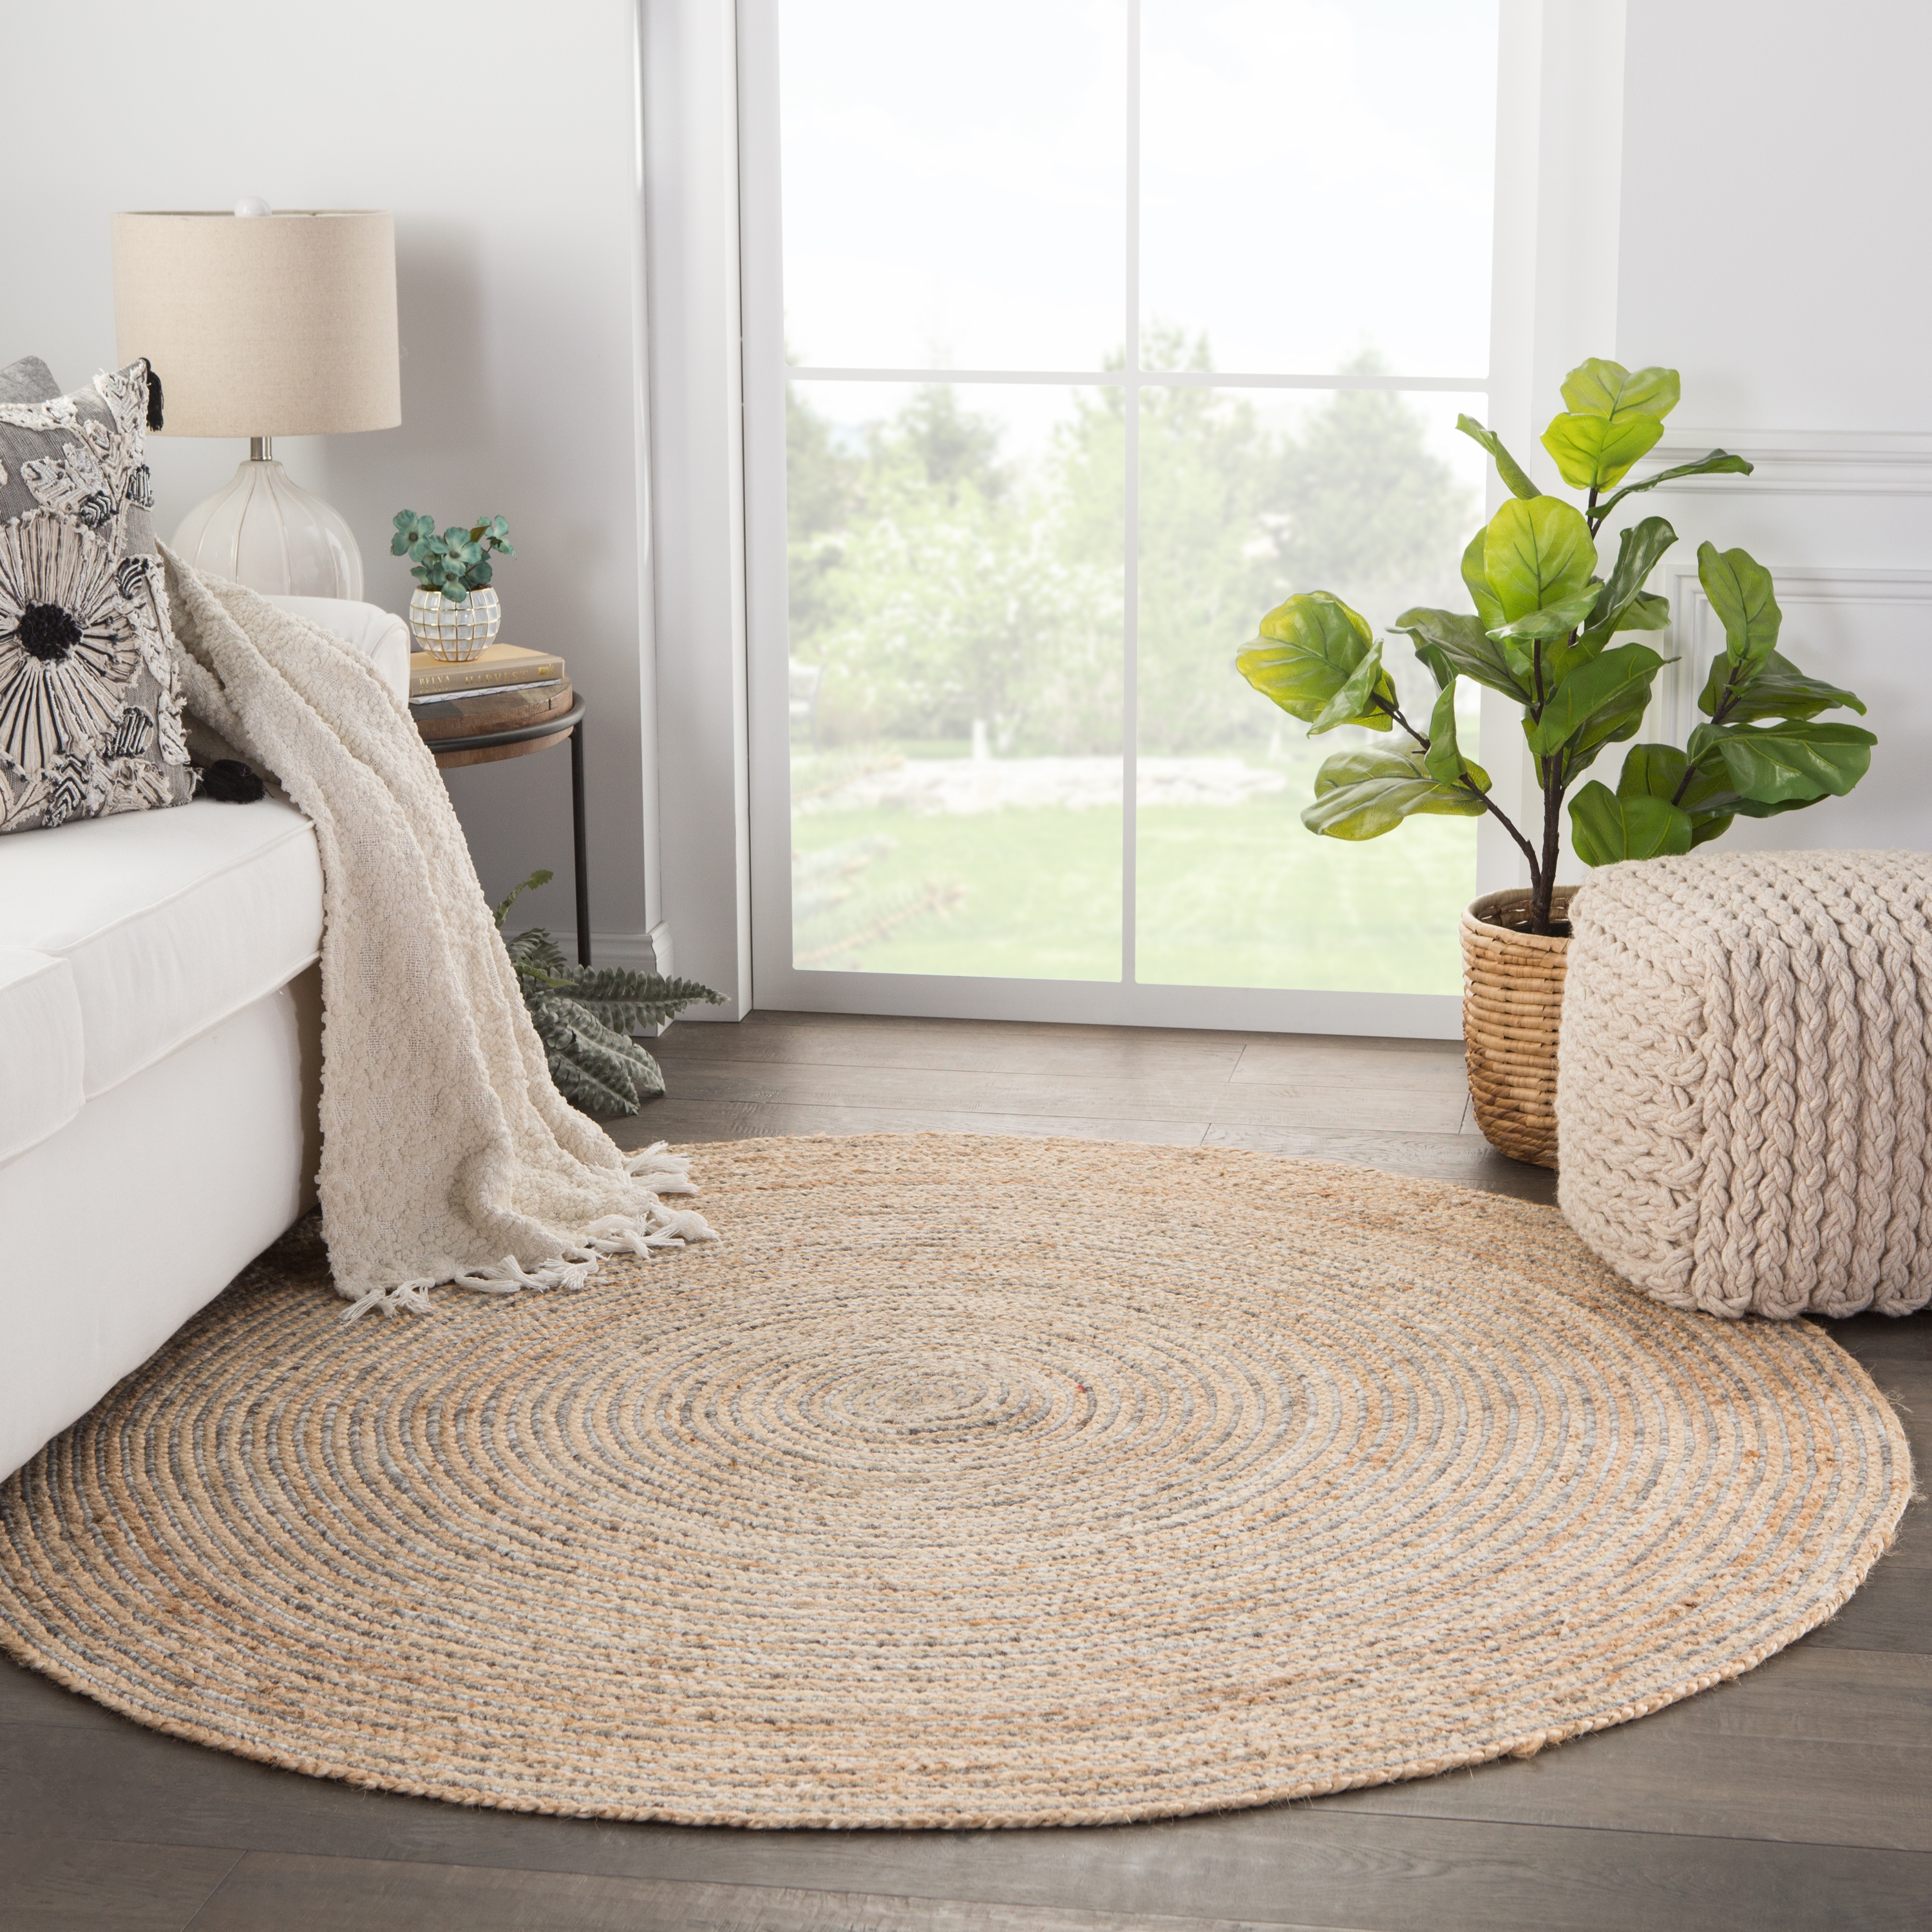 Hastings Natural Solid Beige/ Gray Round Area Rug (6'X6') - Image 3